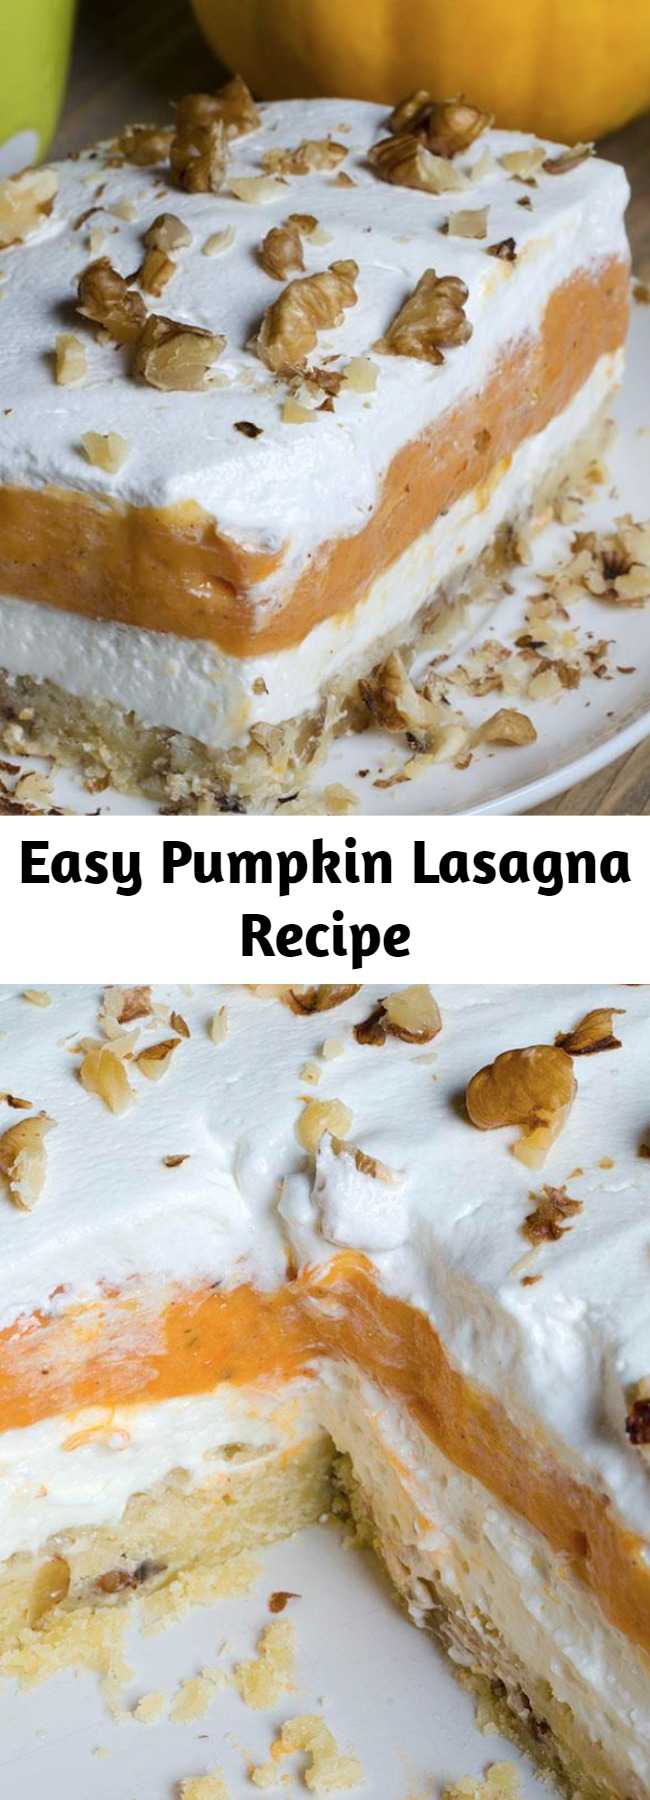 Easy Pumpkin Lasagna Recipe - This awesome Pumpkin Lasagna recipe has layers of moist pumpkin cake, creamy cheesecake and a crunchy crust. It’s a delicious dessert recipe that’s super fun to make and perfect for the fall! #pumpkin #lasagna #desserts